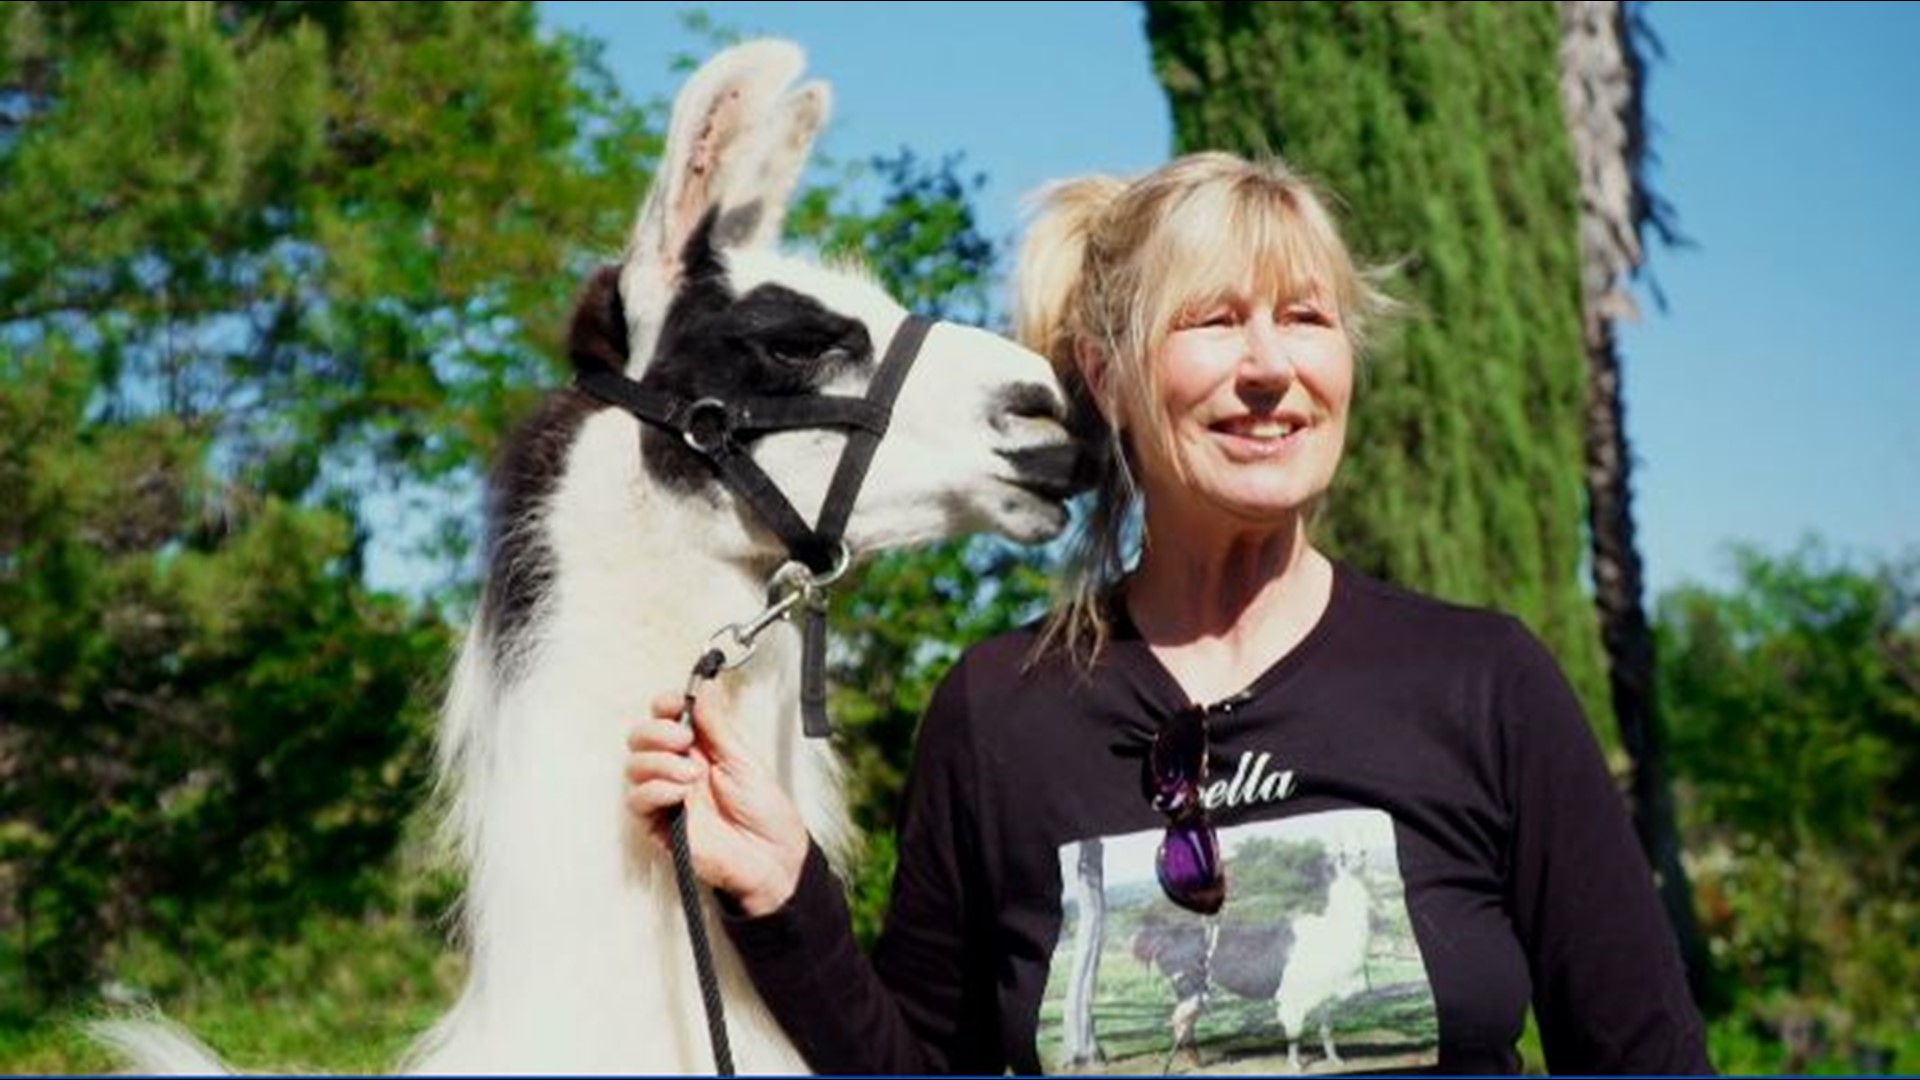 When Bella the llama had to have a leg amputated, owner Trish Robuck tried everything she could to get her walking again.